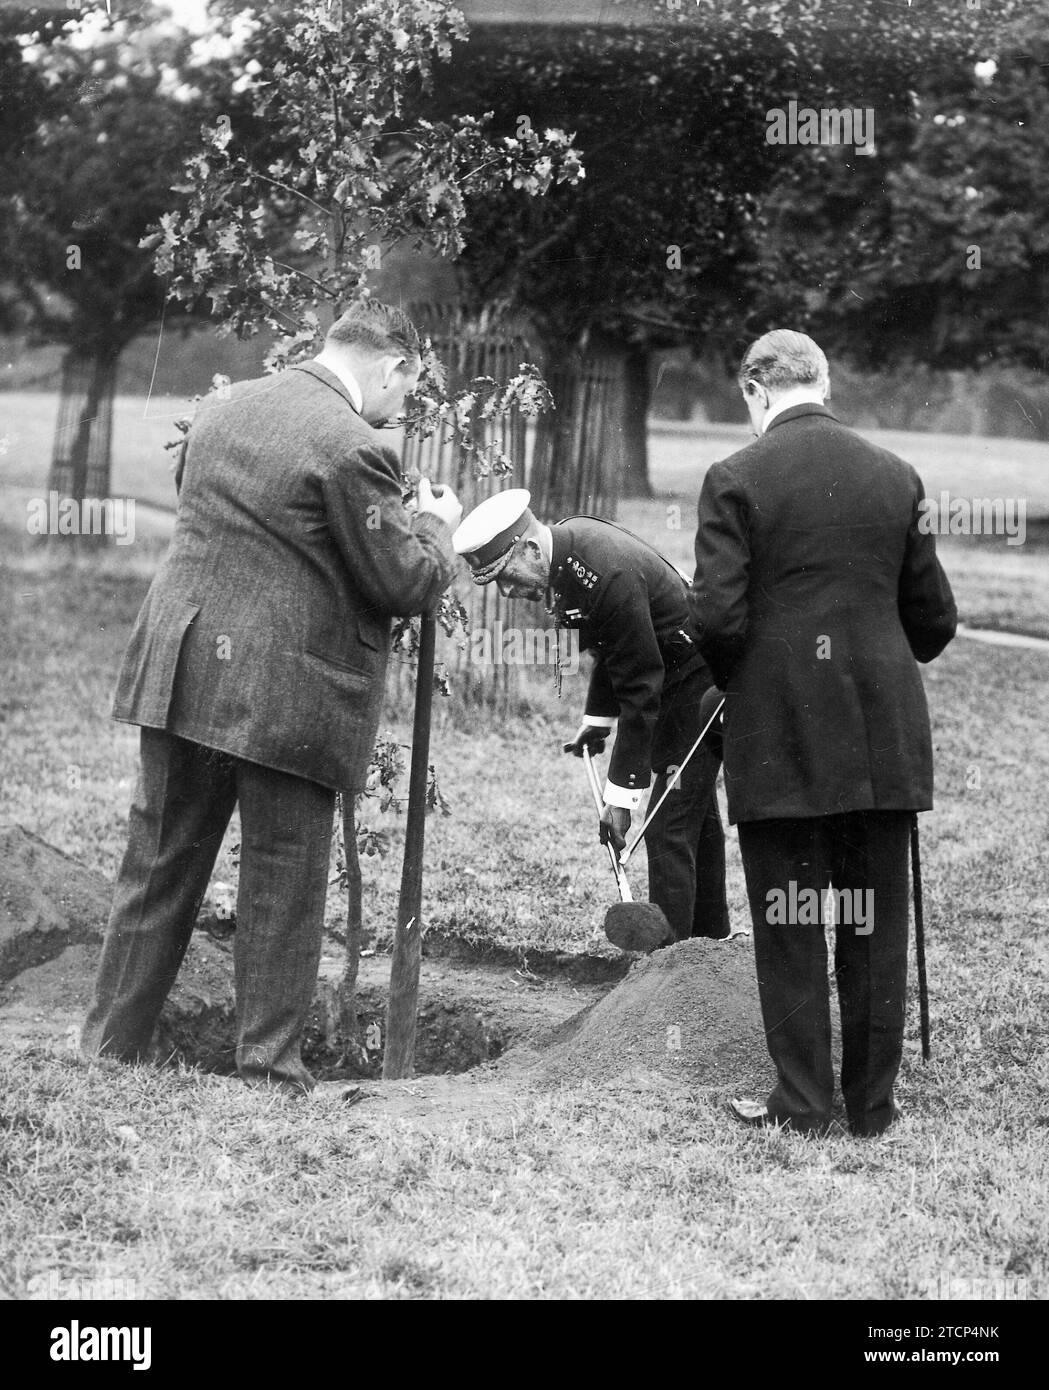 09/30/1913. The King of England in Althorp Park. HM King George V of England planting a tree in Althorp Park to commemorate his visit to such a beautiful site. Credit: Album / Archivo ABC / Louis Hugelmann Stock Photo